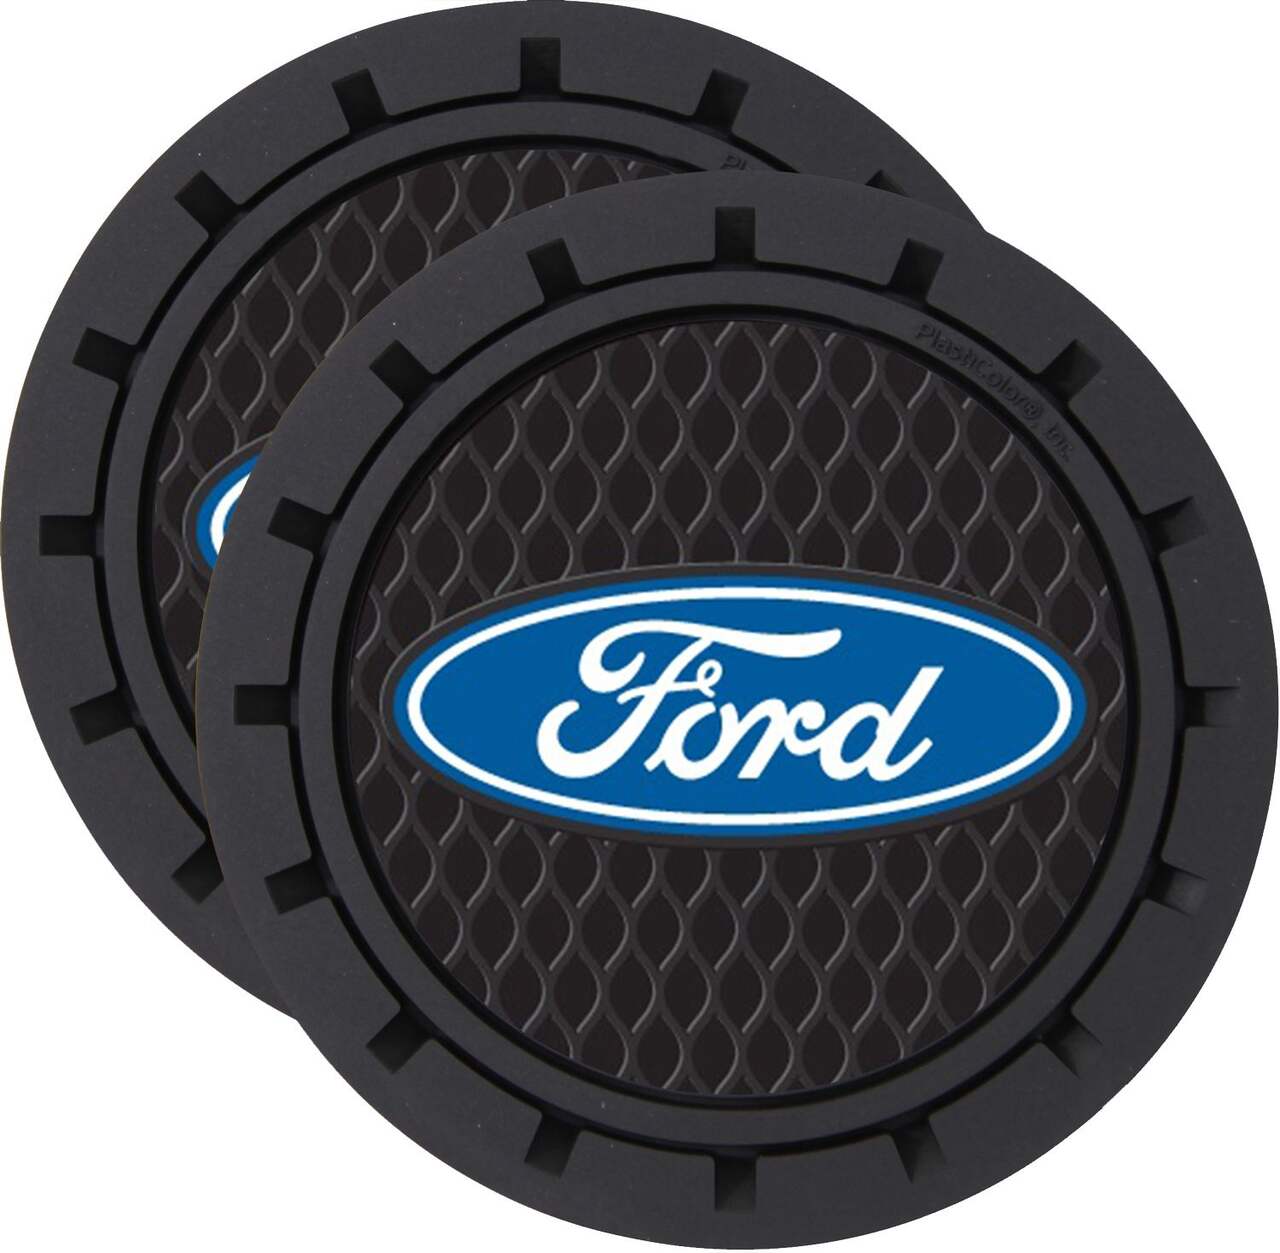 High Road Cupholder Car Coasters - 2 Pack